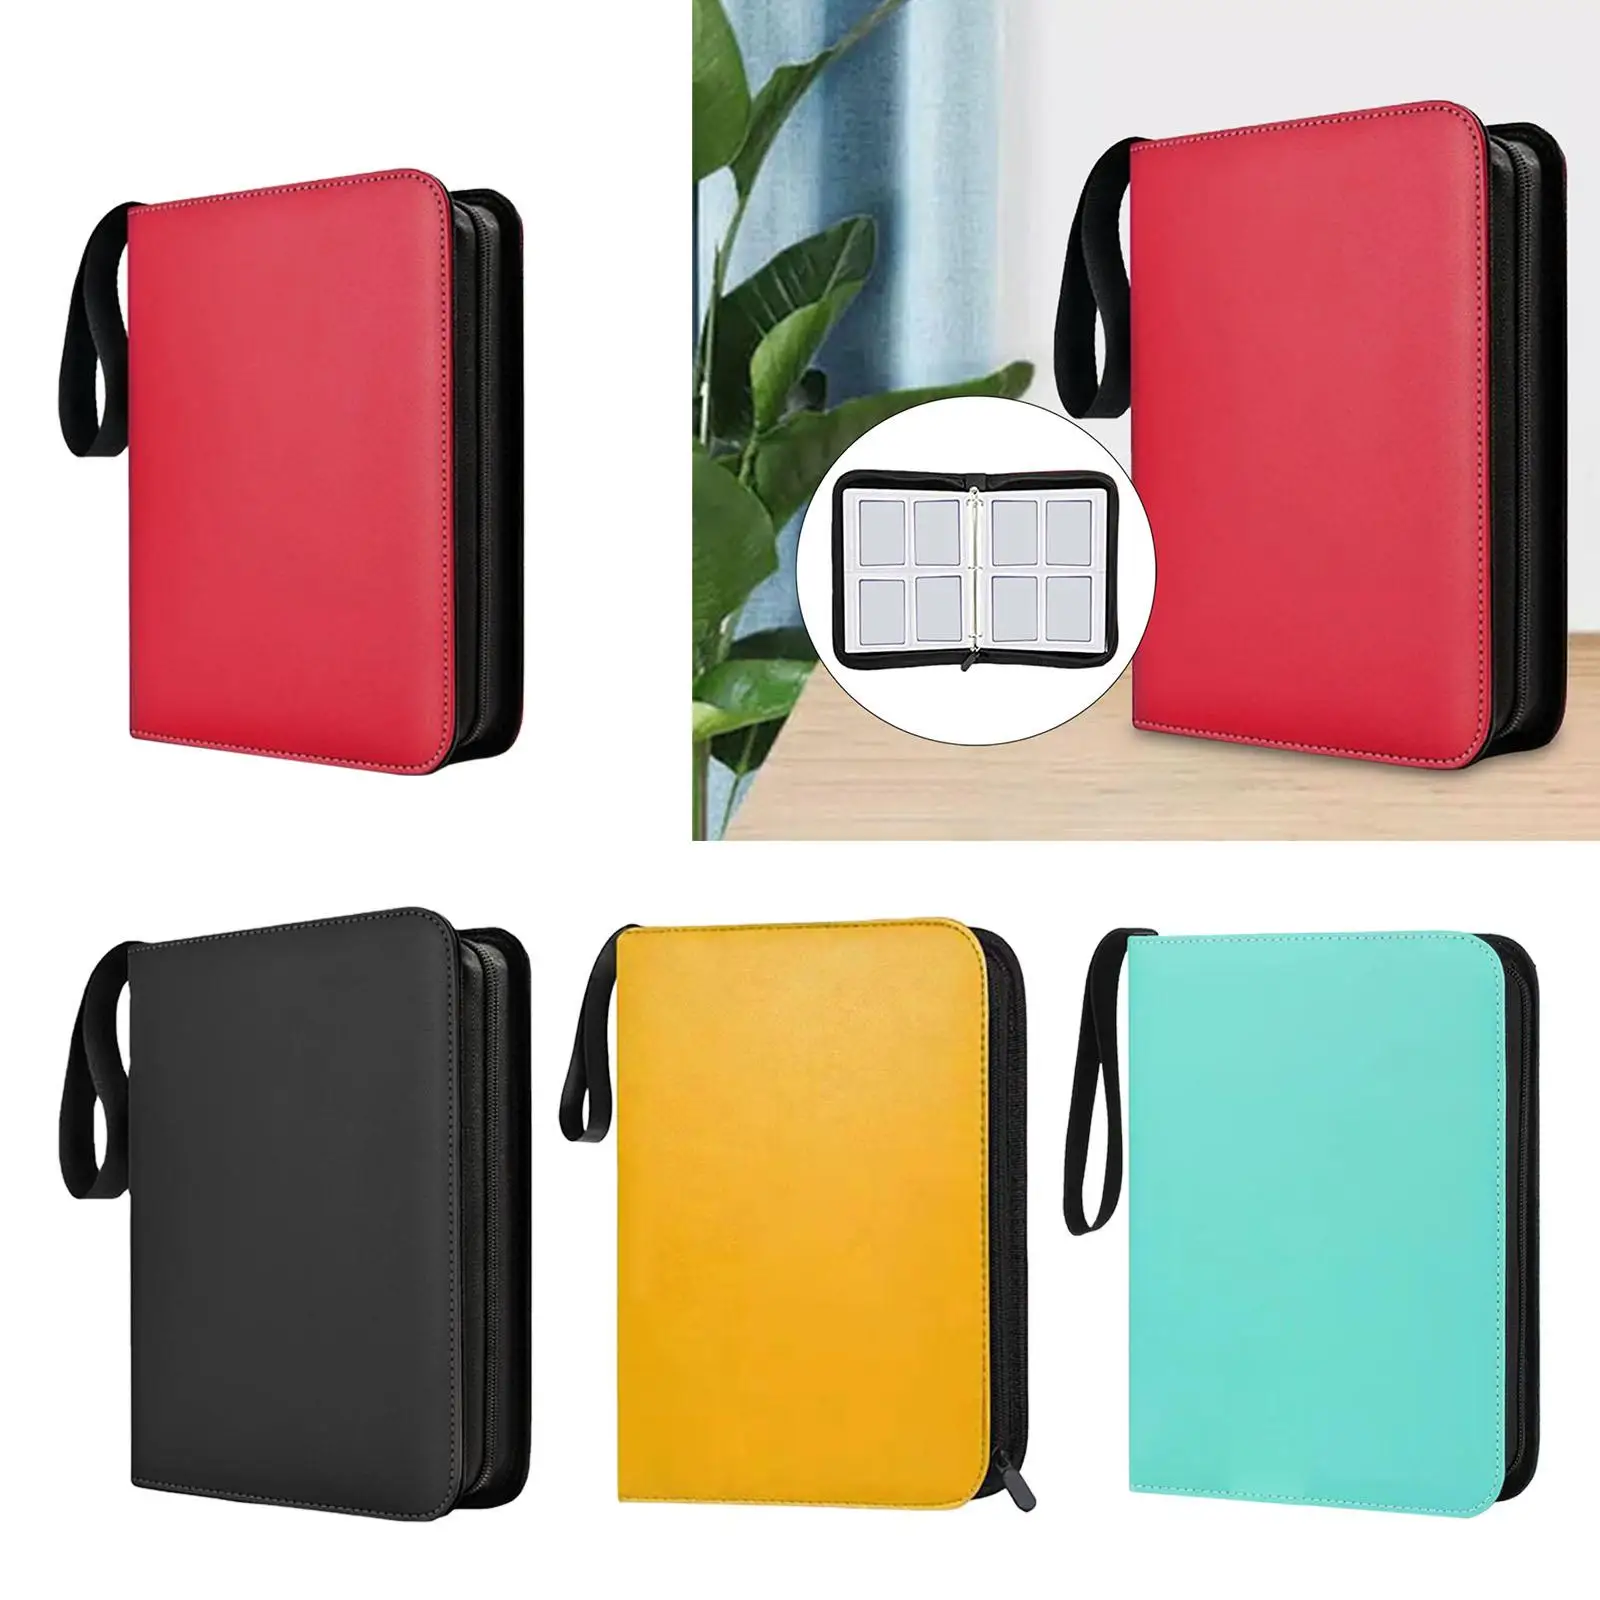 Durable 400 Double Sided Album Holder Organizer Display Gathering Card Toy Zip 400 Cards Album Display Holder for Sports Cards